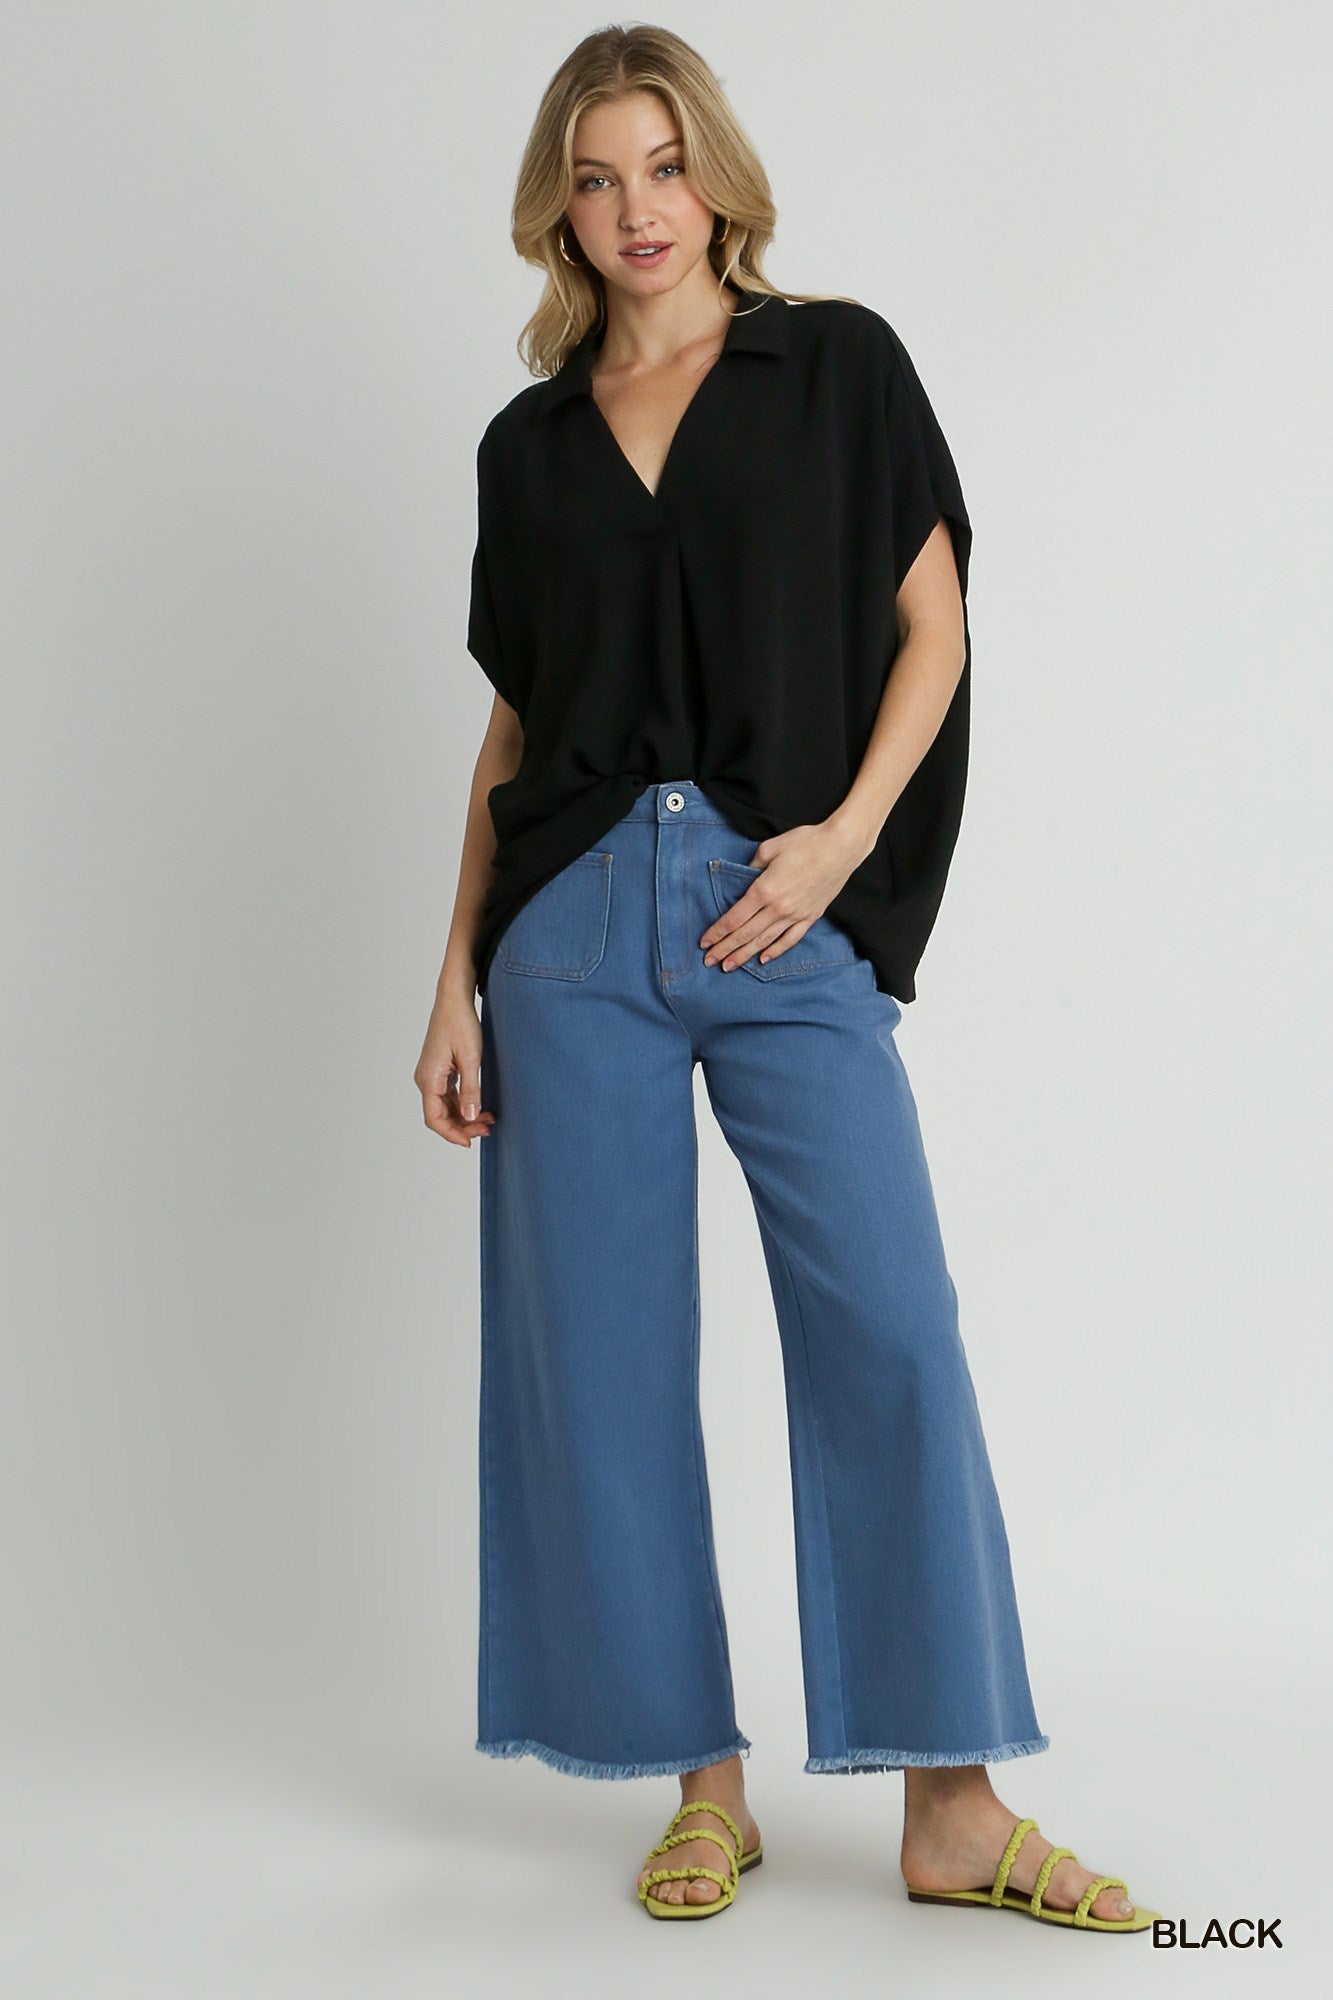 Umgee Oversized Collared Top in Black